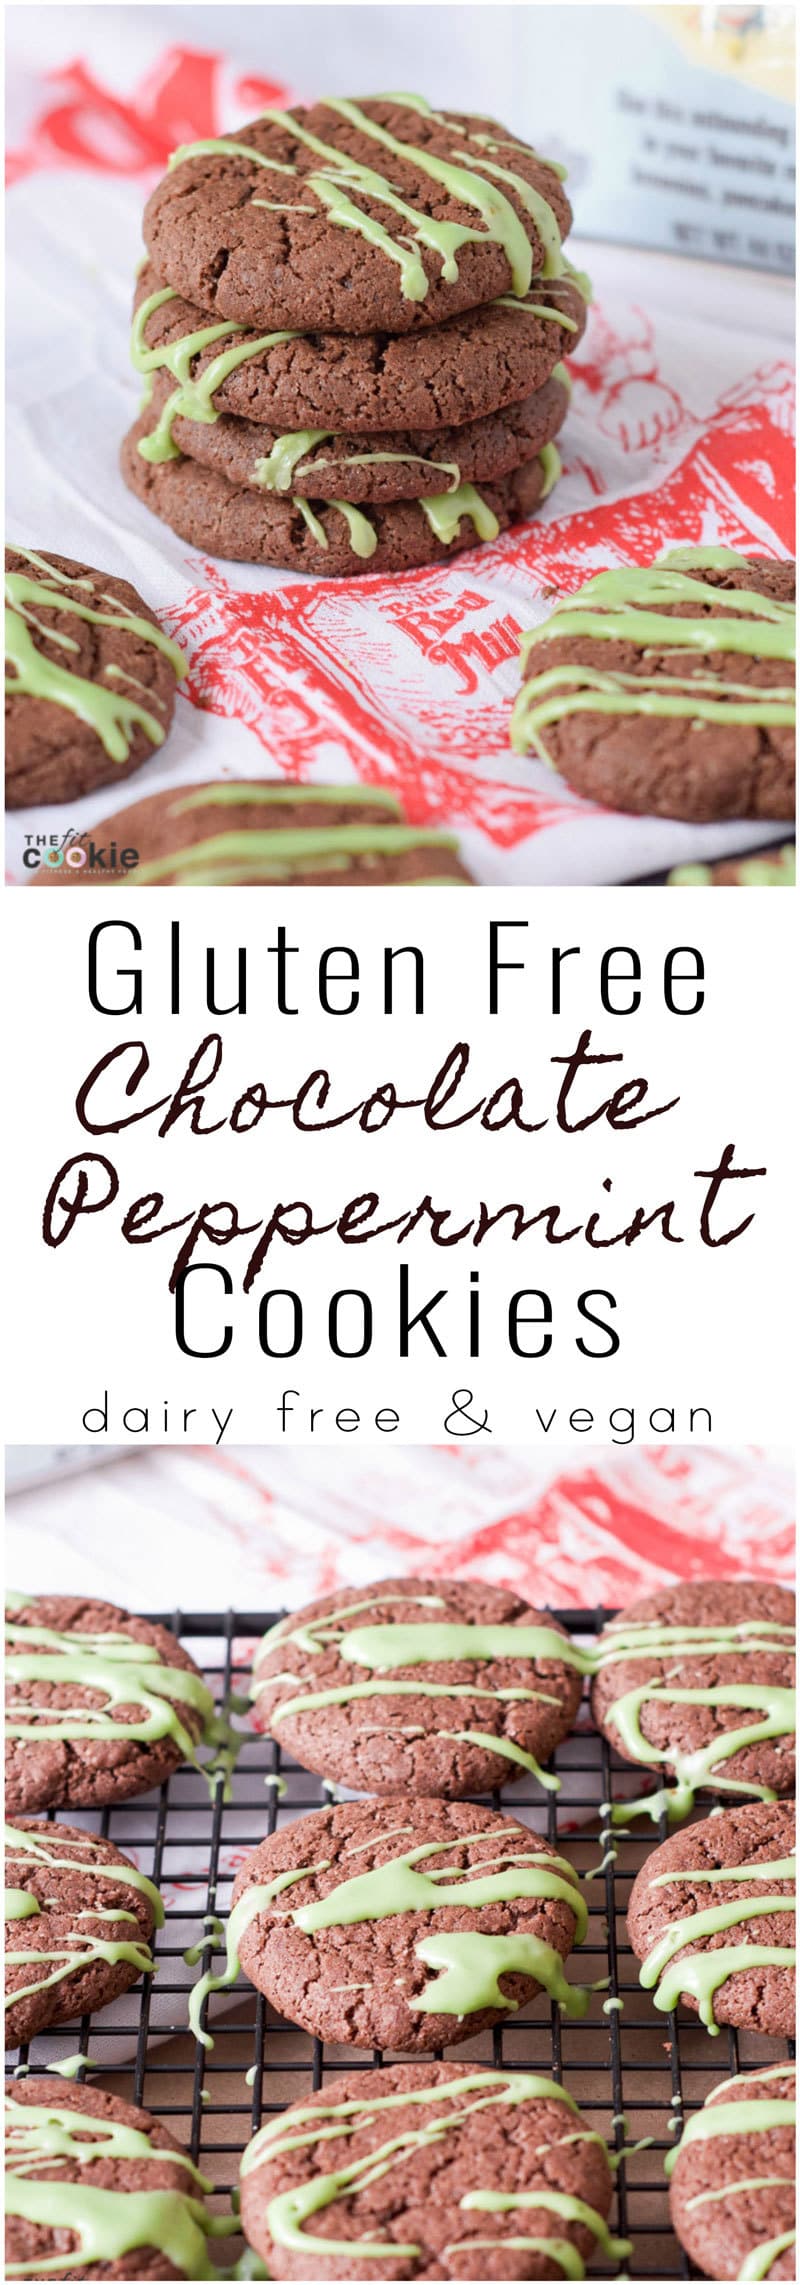 Spread some cheer this season with the gift of baking! These Gluten Free Peppermint Cookies are the perfect way to share small acts of kindness to brighten someone's day. Made with Love, Baked with Bob's - #AD @TheFitCookie #Bakesgiving #glutenfree #vegan